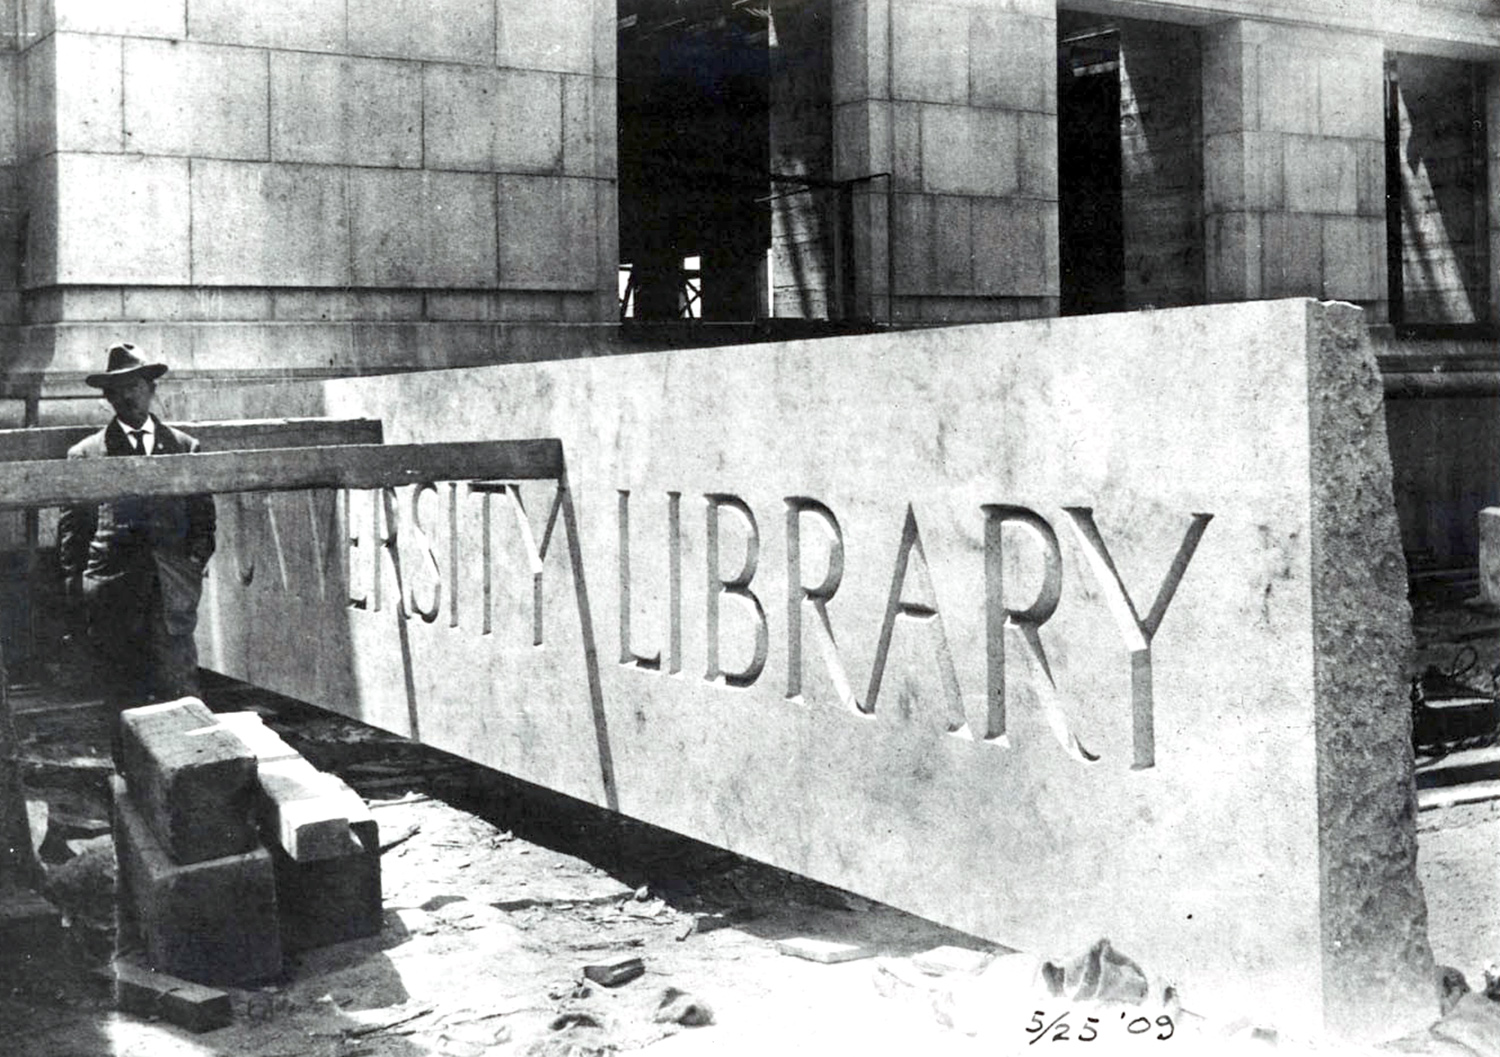 Construction of Doe Library